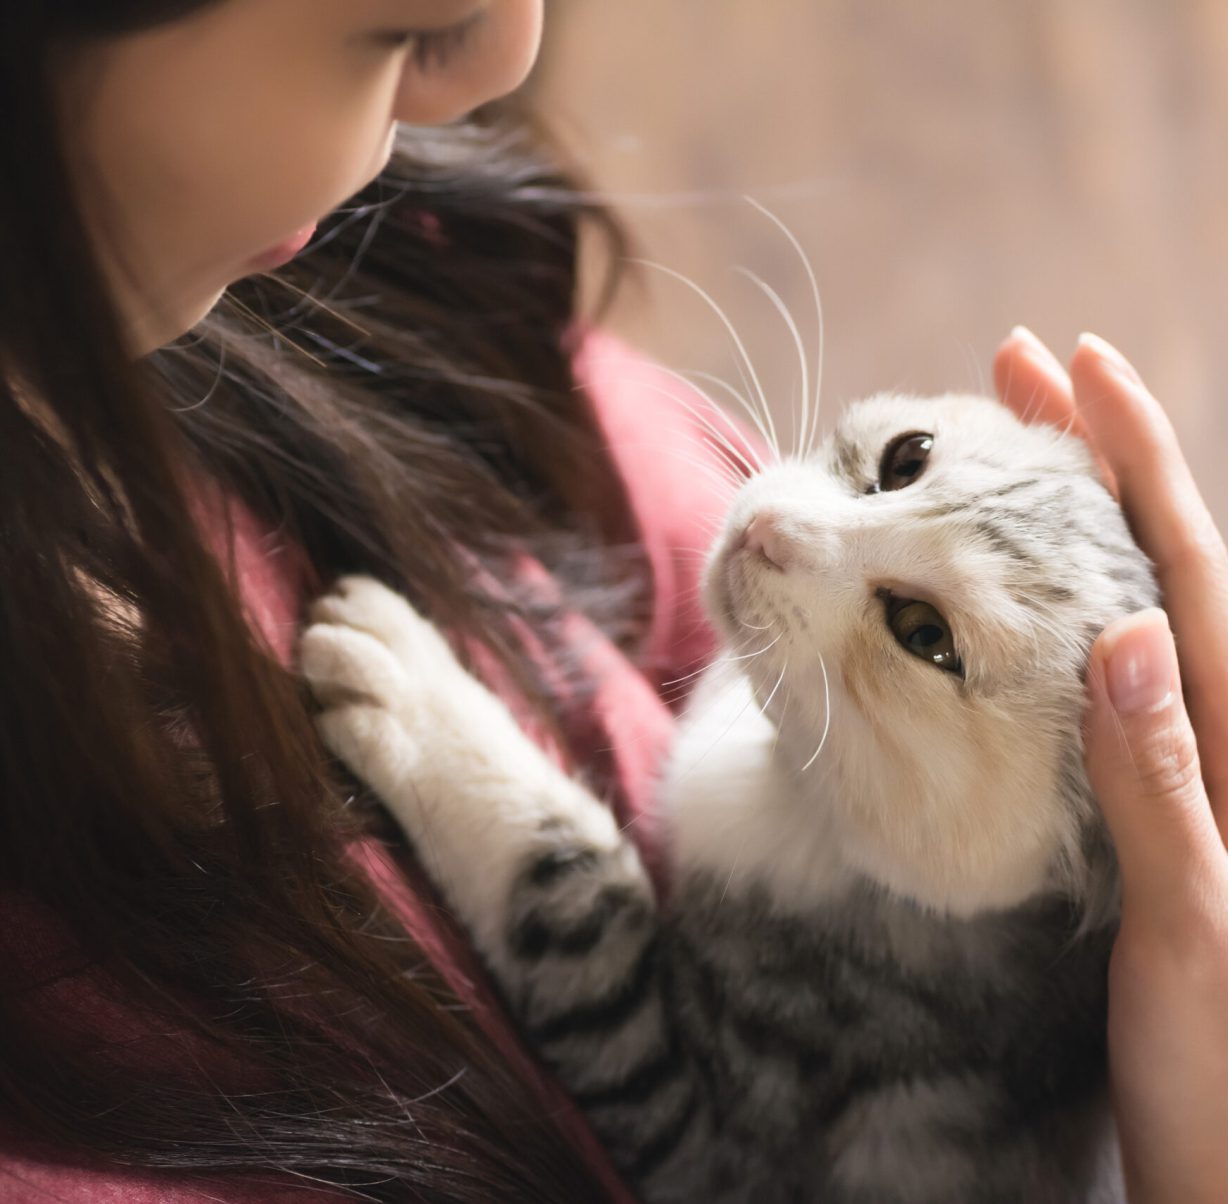 An Asian woman play with her kitten at home.